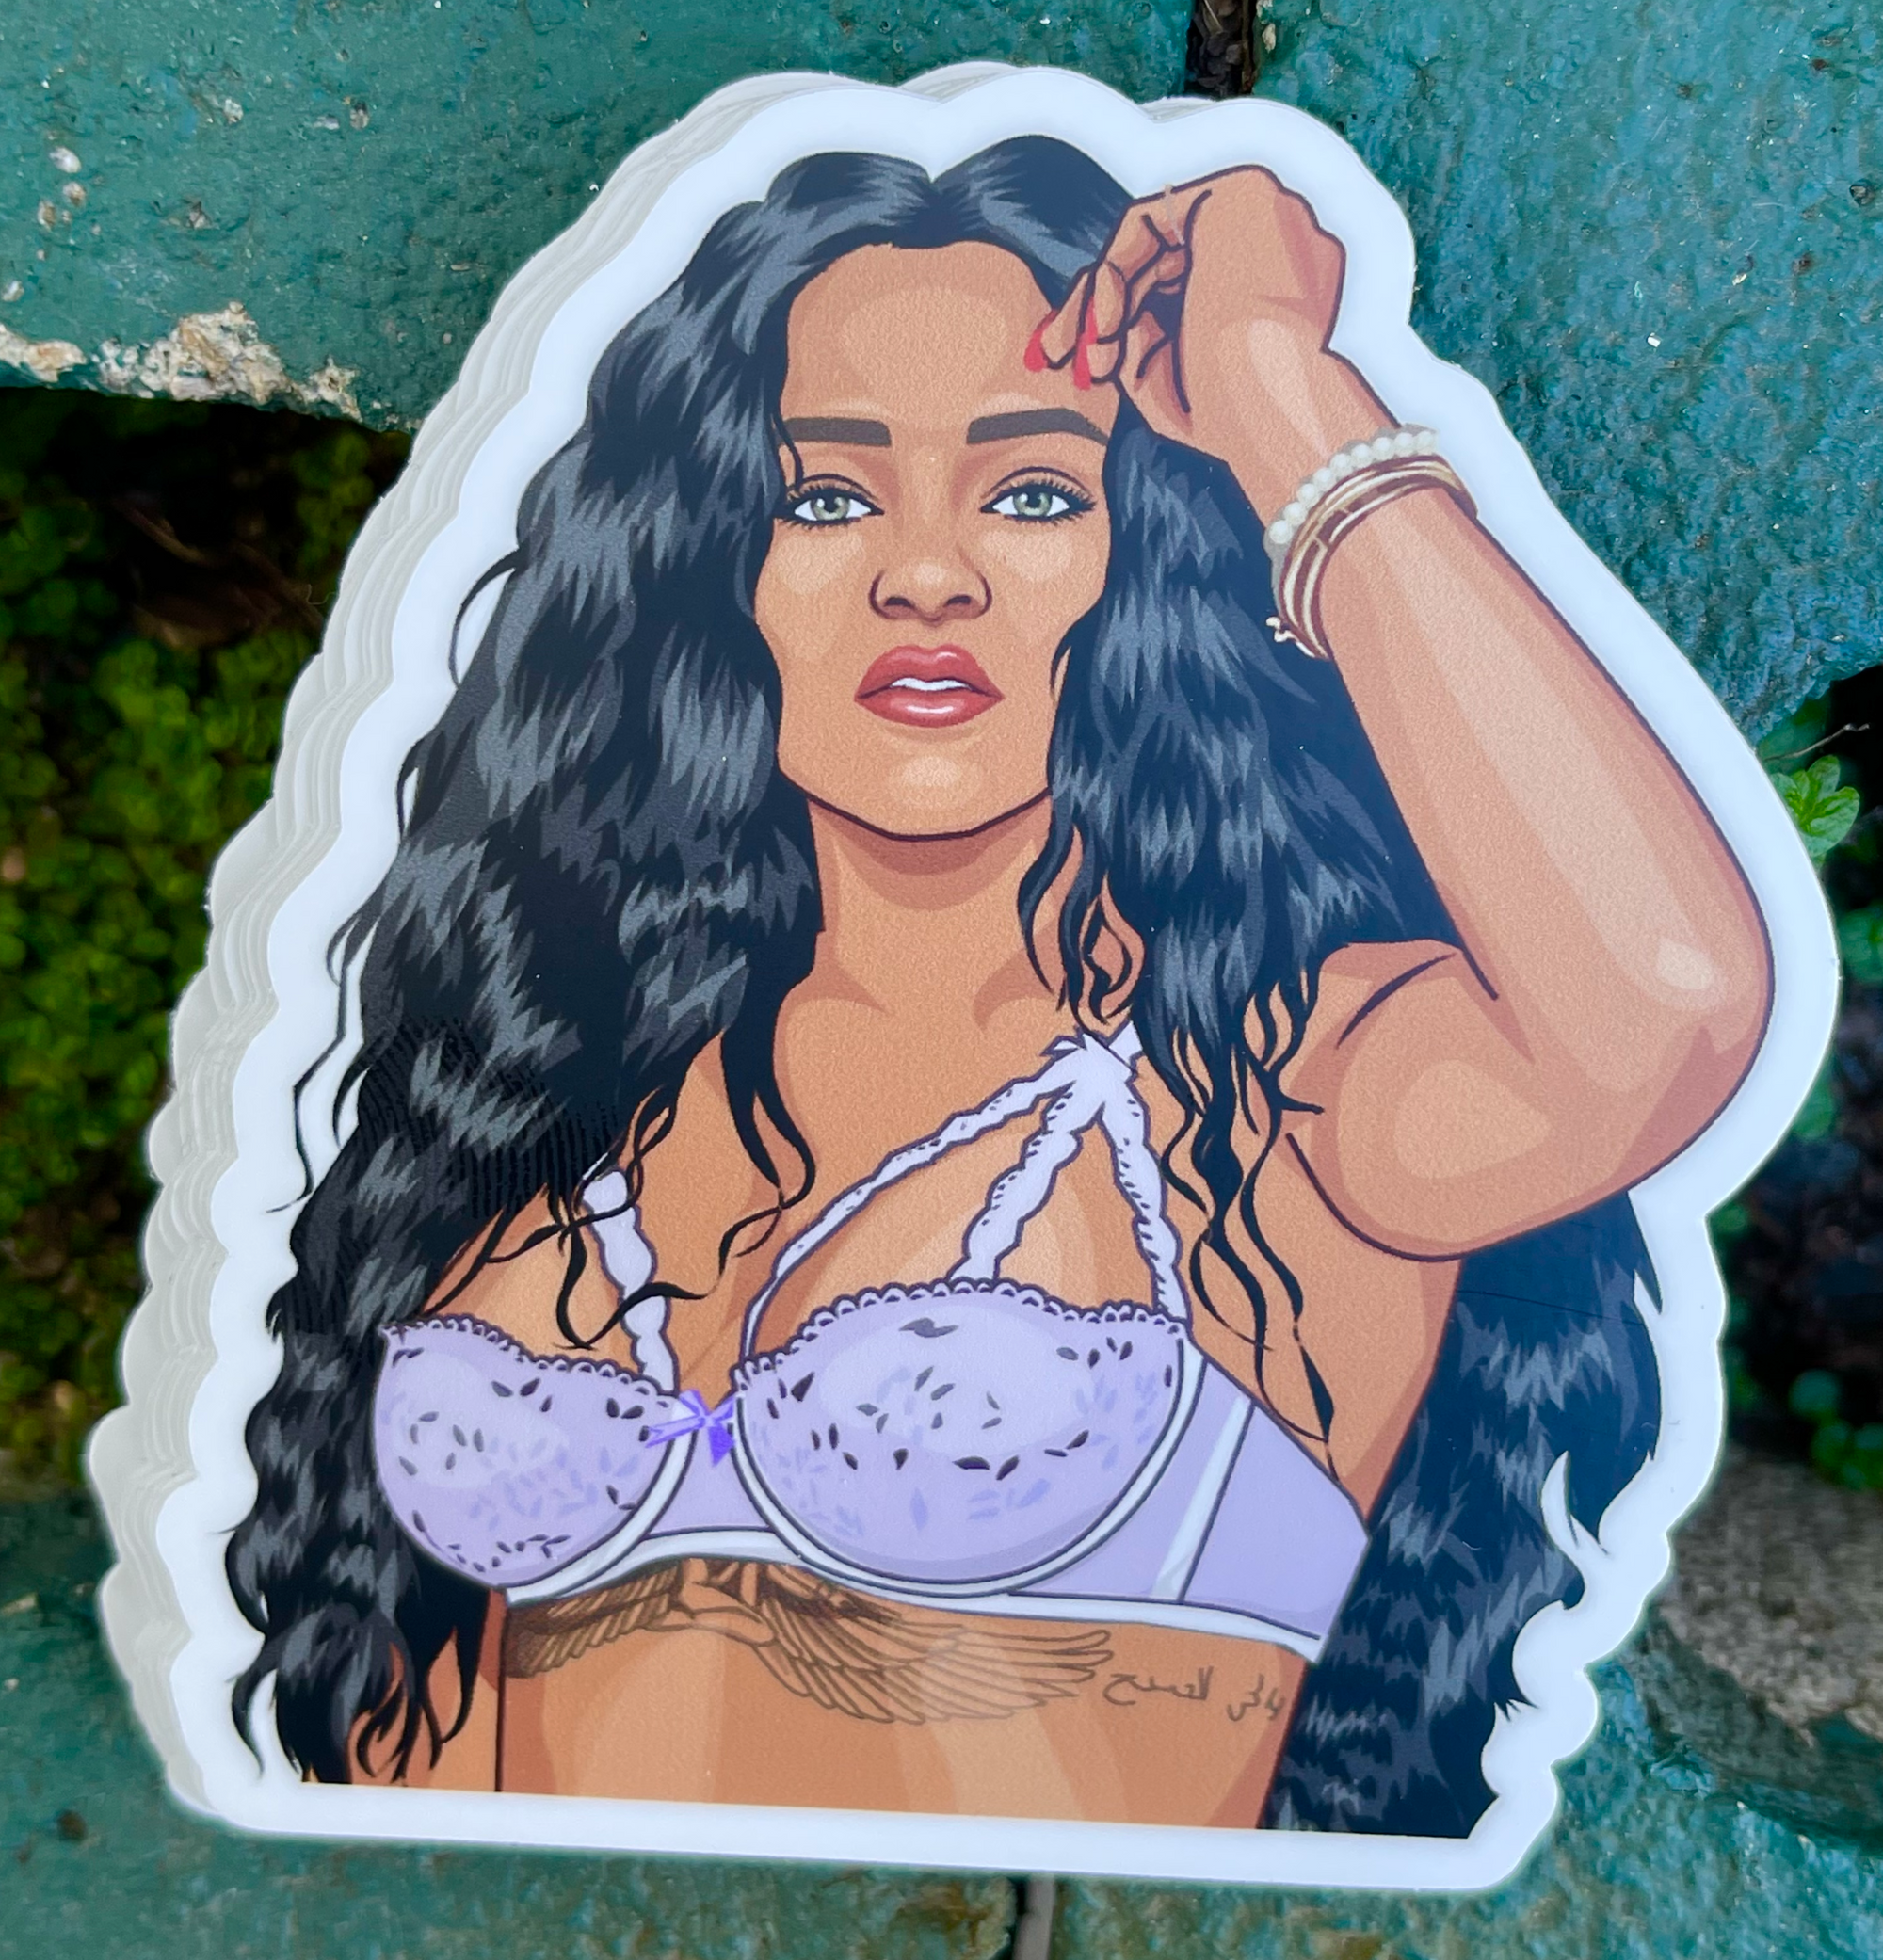 RiRi Sticker – One 4 Inch Water Proof Vinyl Sticker – For Hydro Flask, Skateboard, Laptop, Planner, Car, Collecting, Gifting